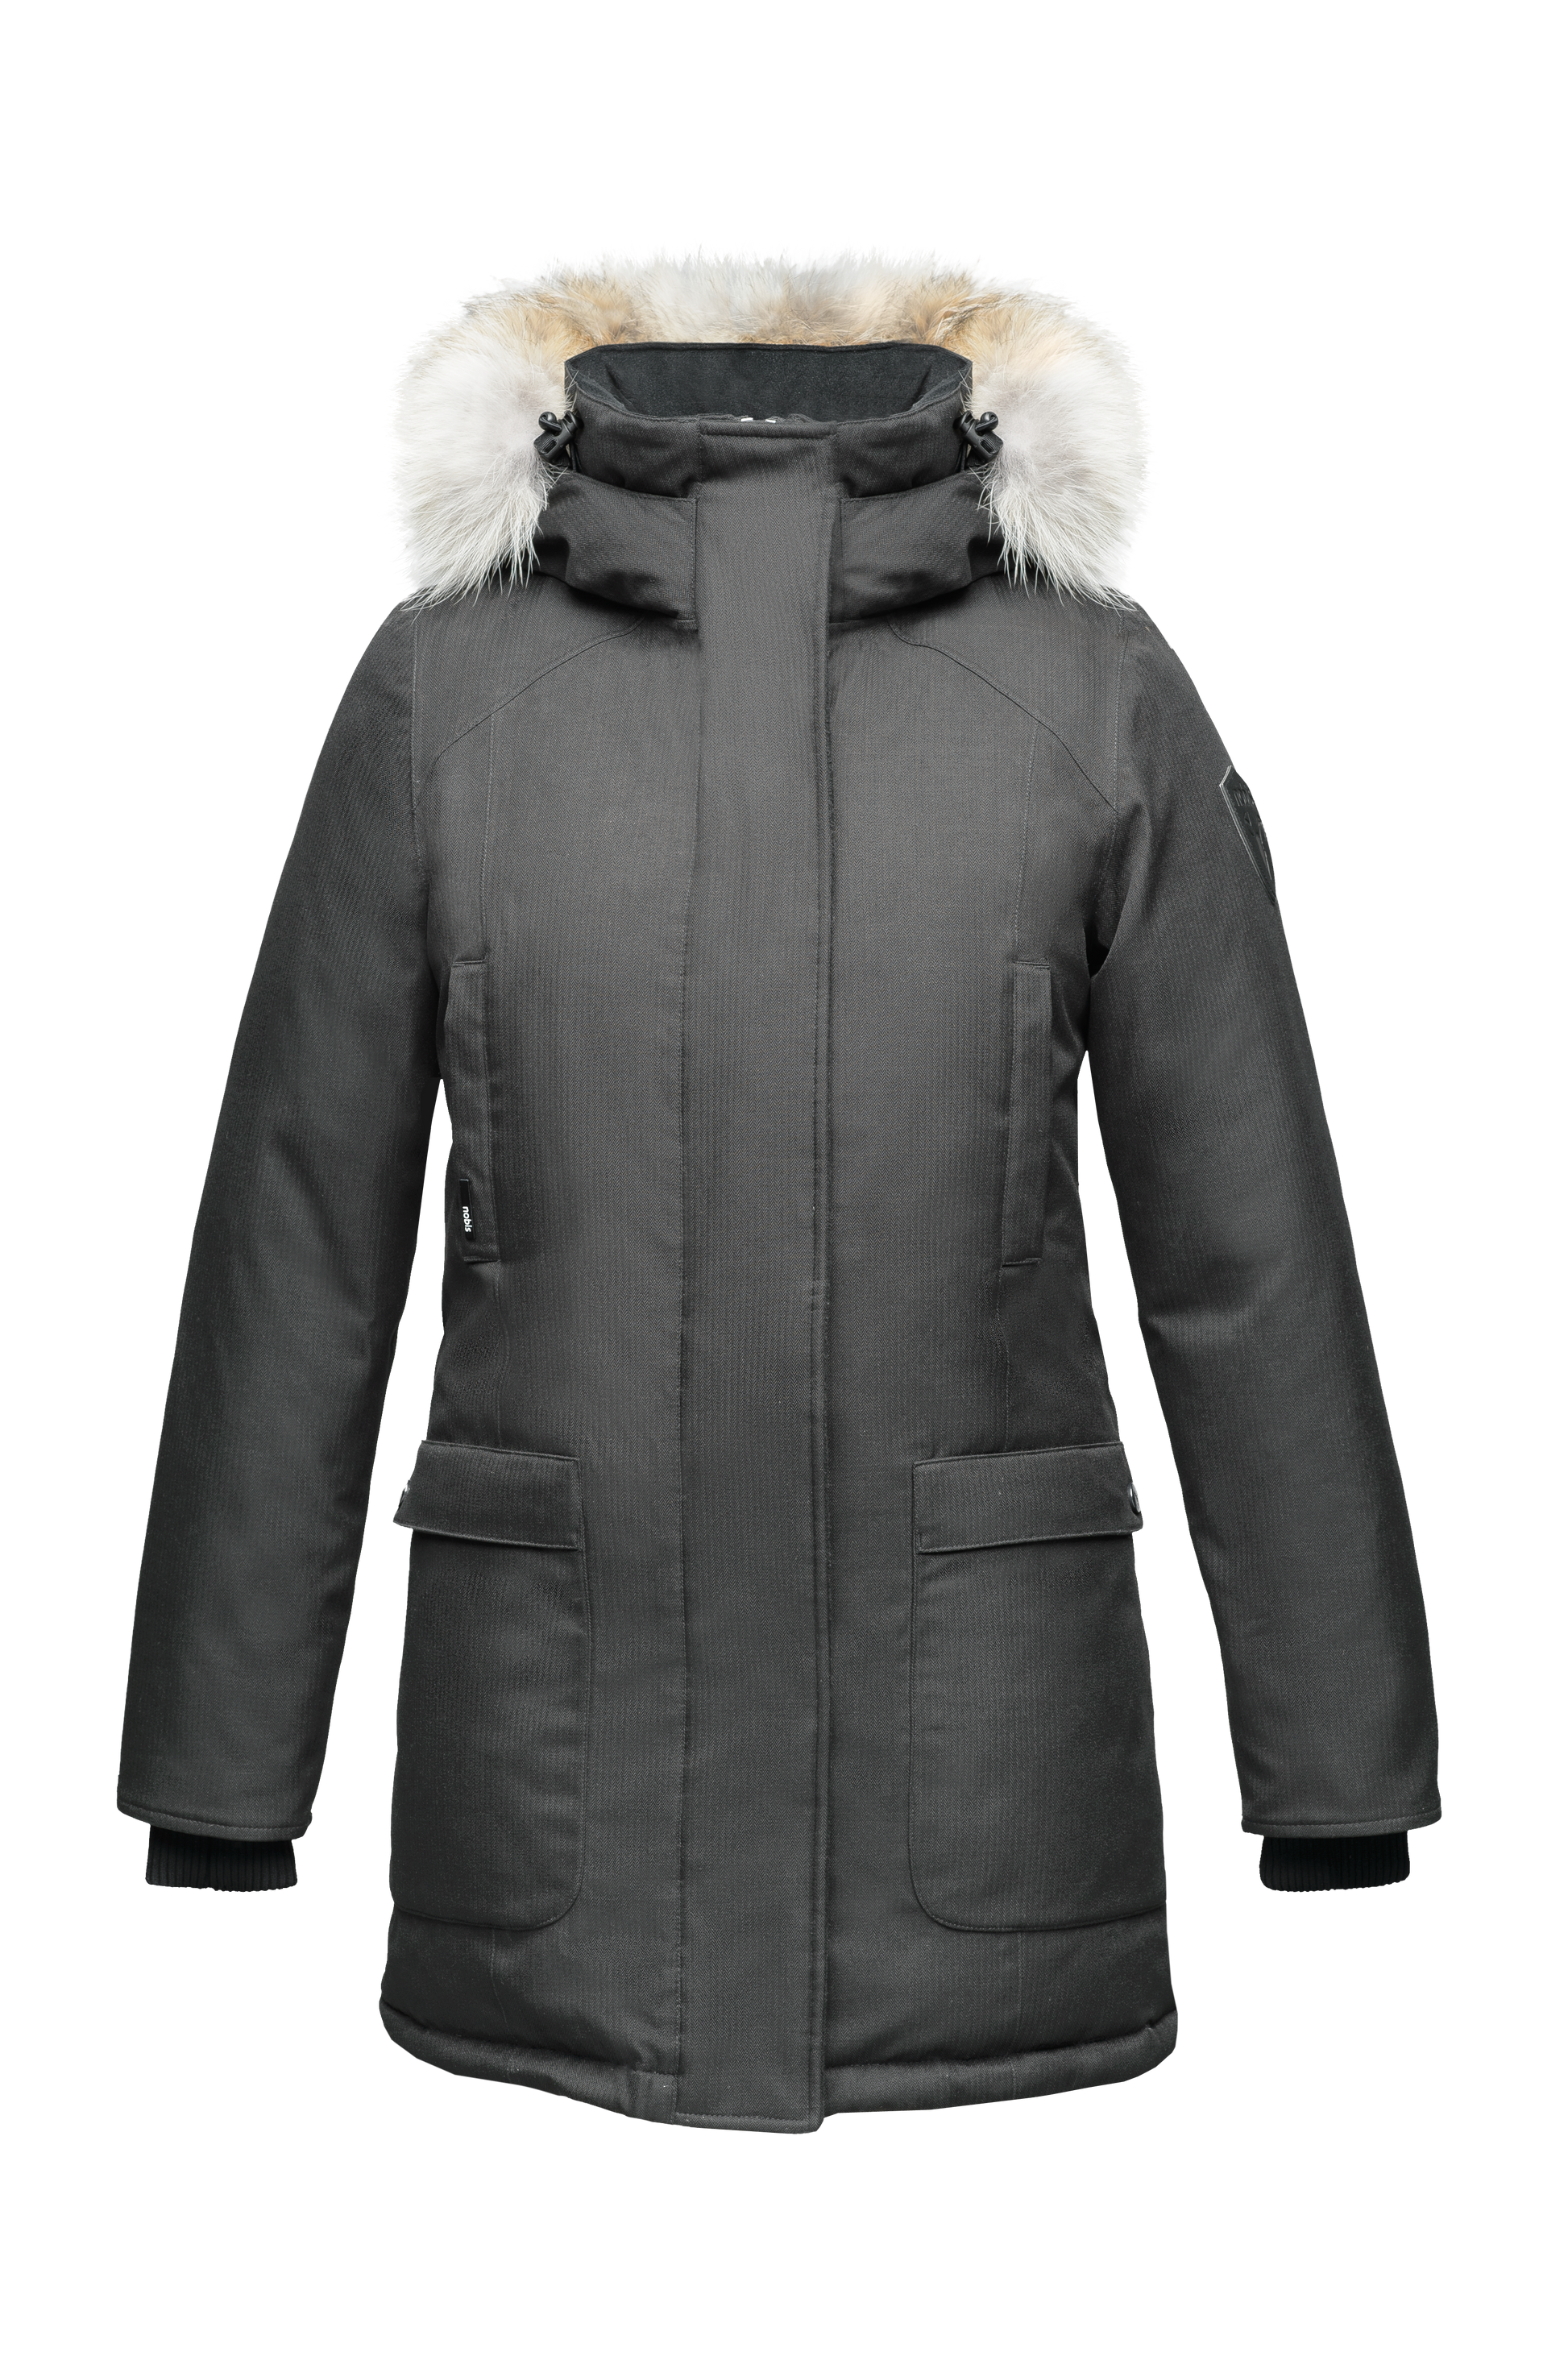 Women's down filled parka that sits just below the hip with a clean look and two hip patch pockets in CH Steel Grey